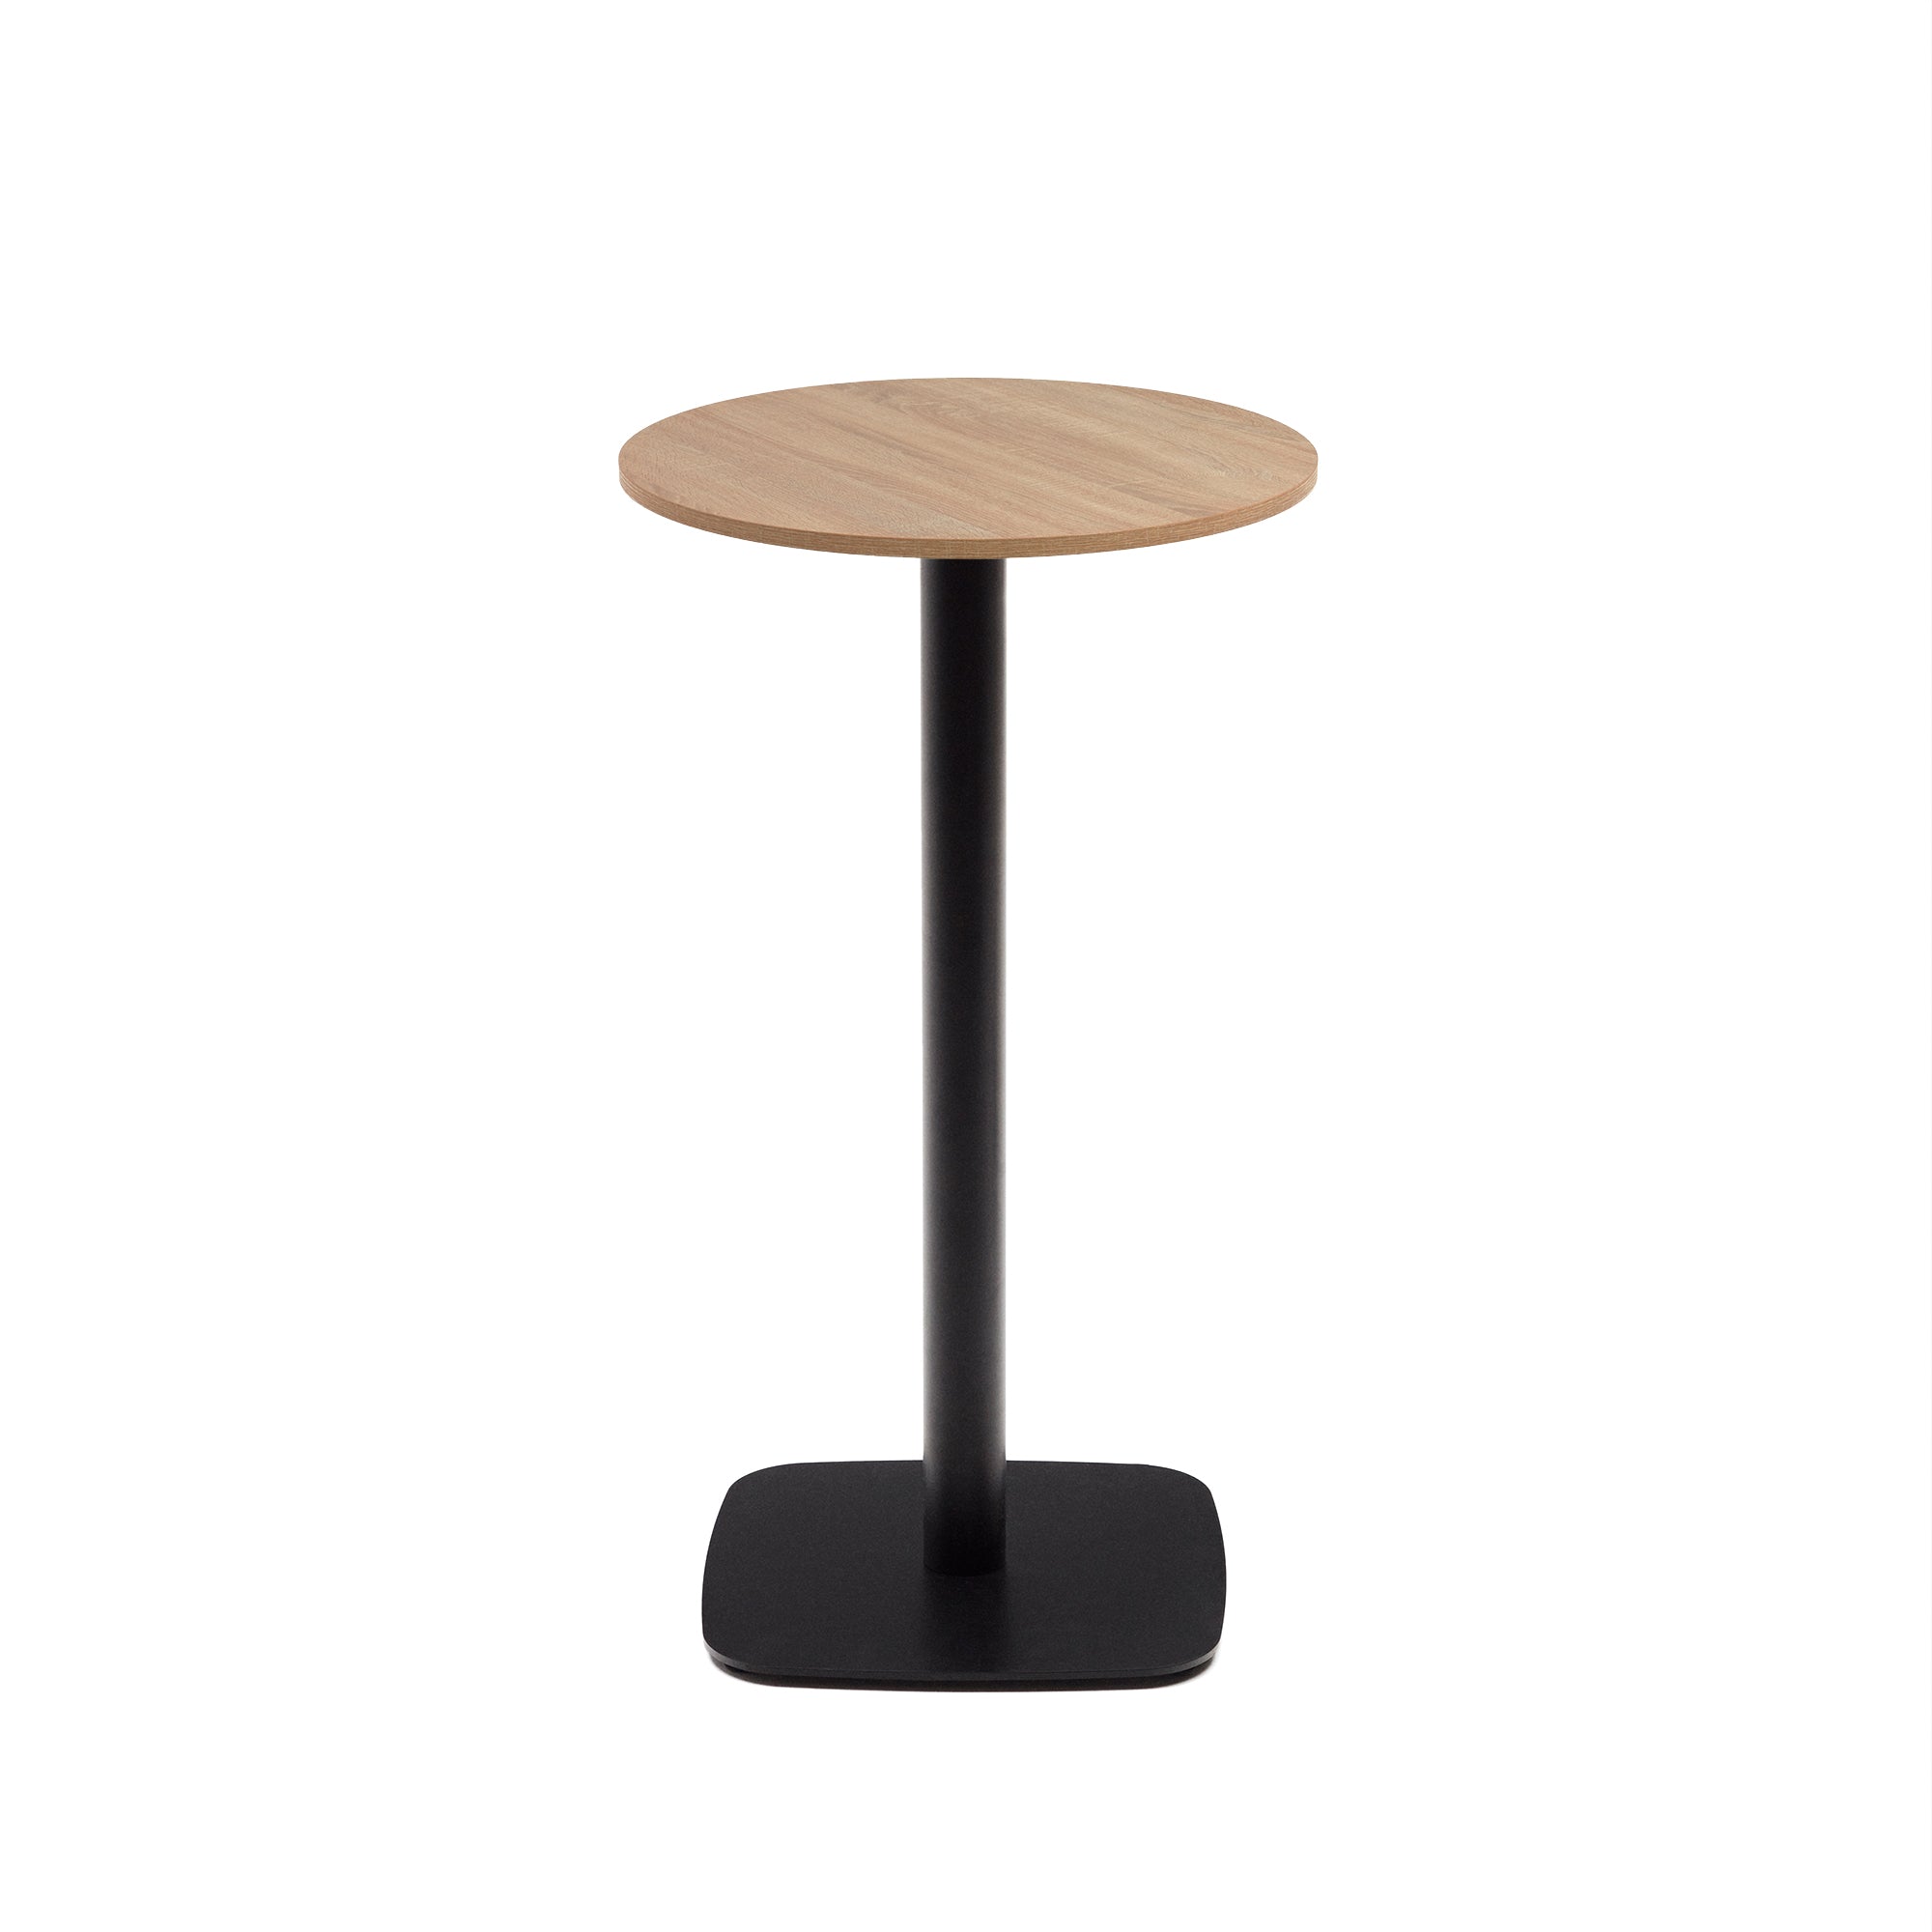 Dina high round table in natural finish melamine with metal leg in a painted black finish, Ø 60x96 cm